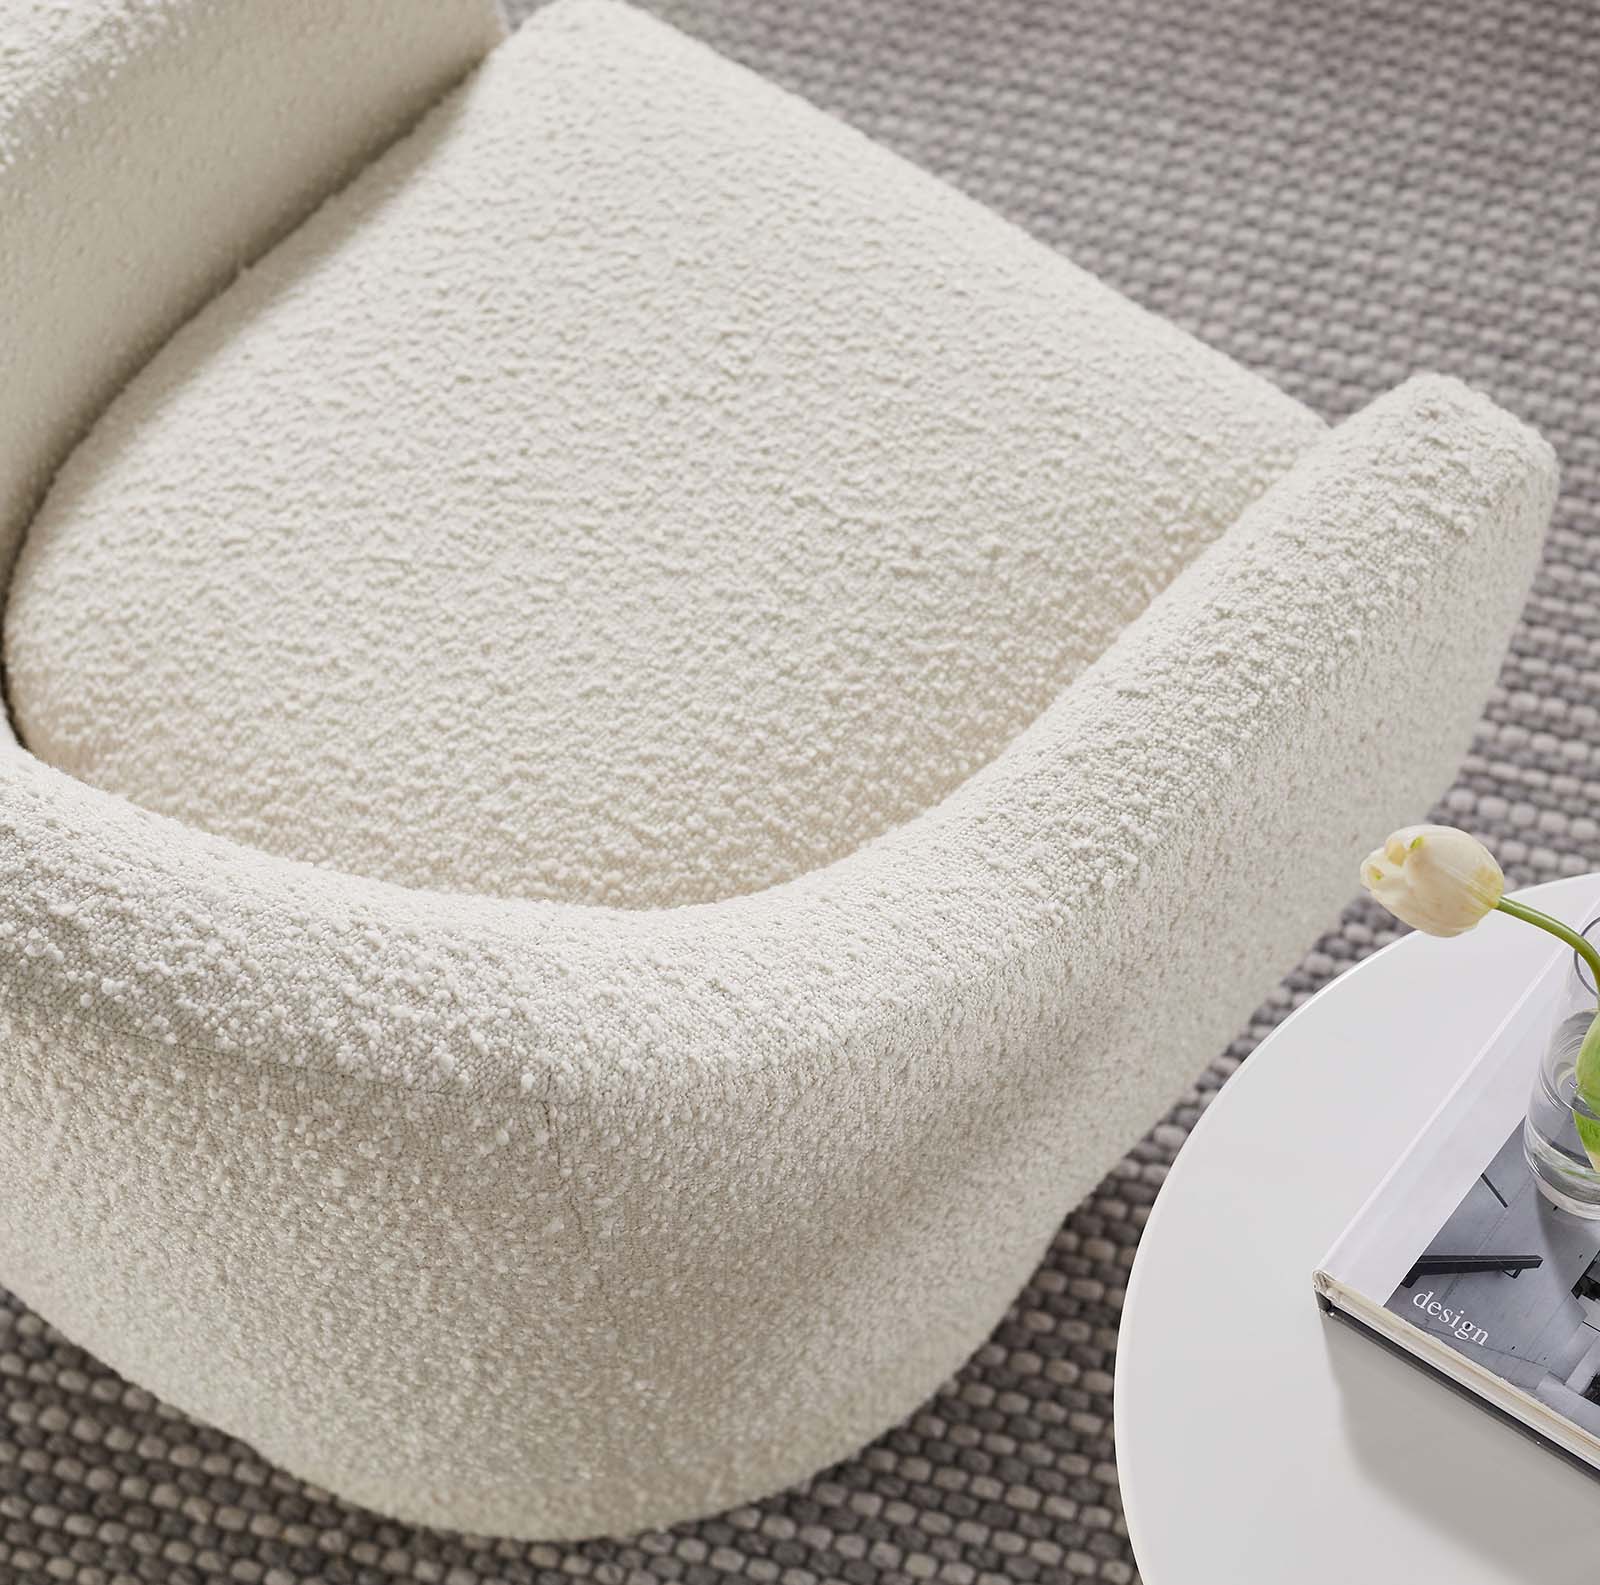 Astral Boucle Fabric Swivel Chair - East Shore Modern Home Furnishings